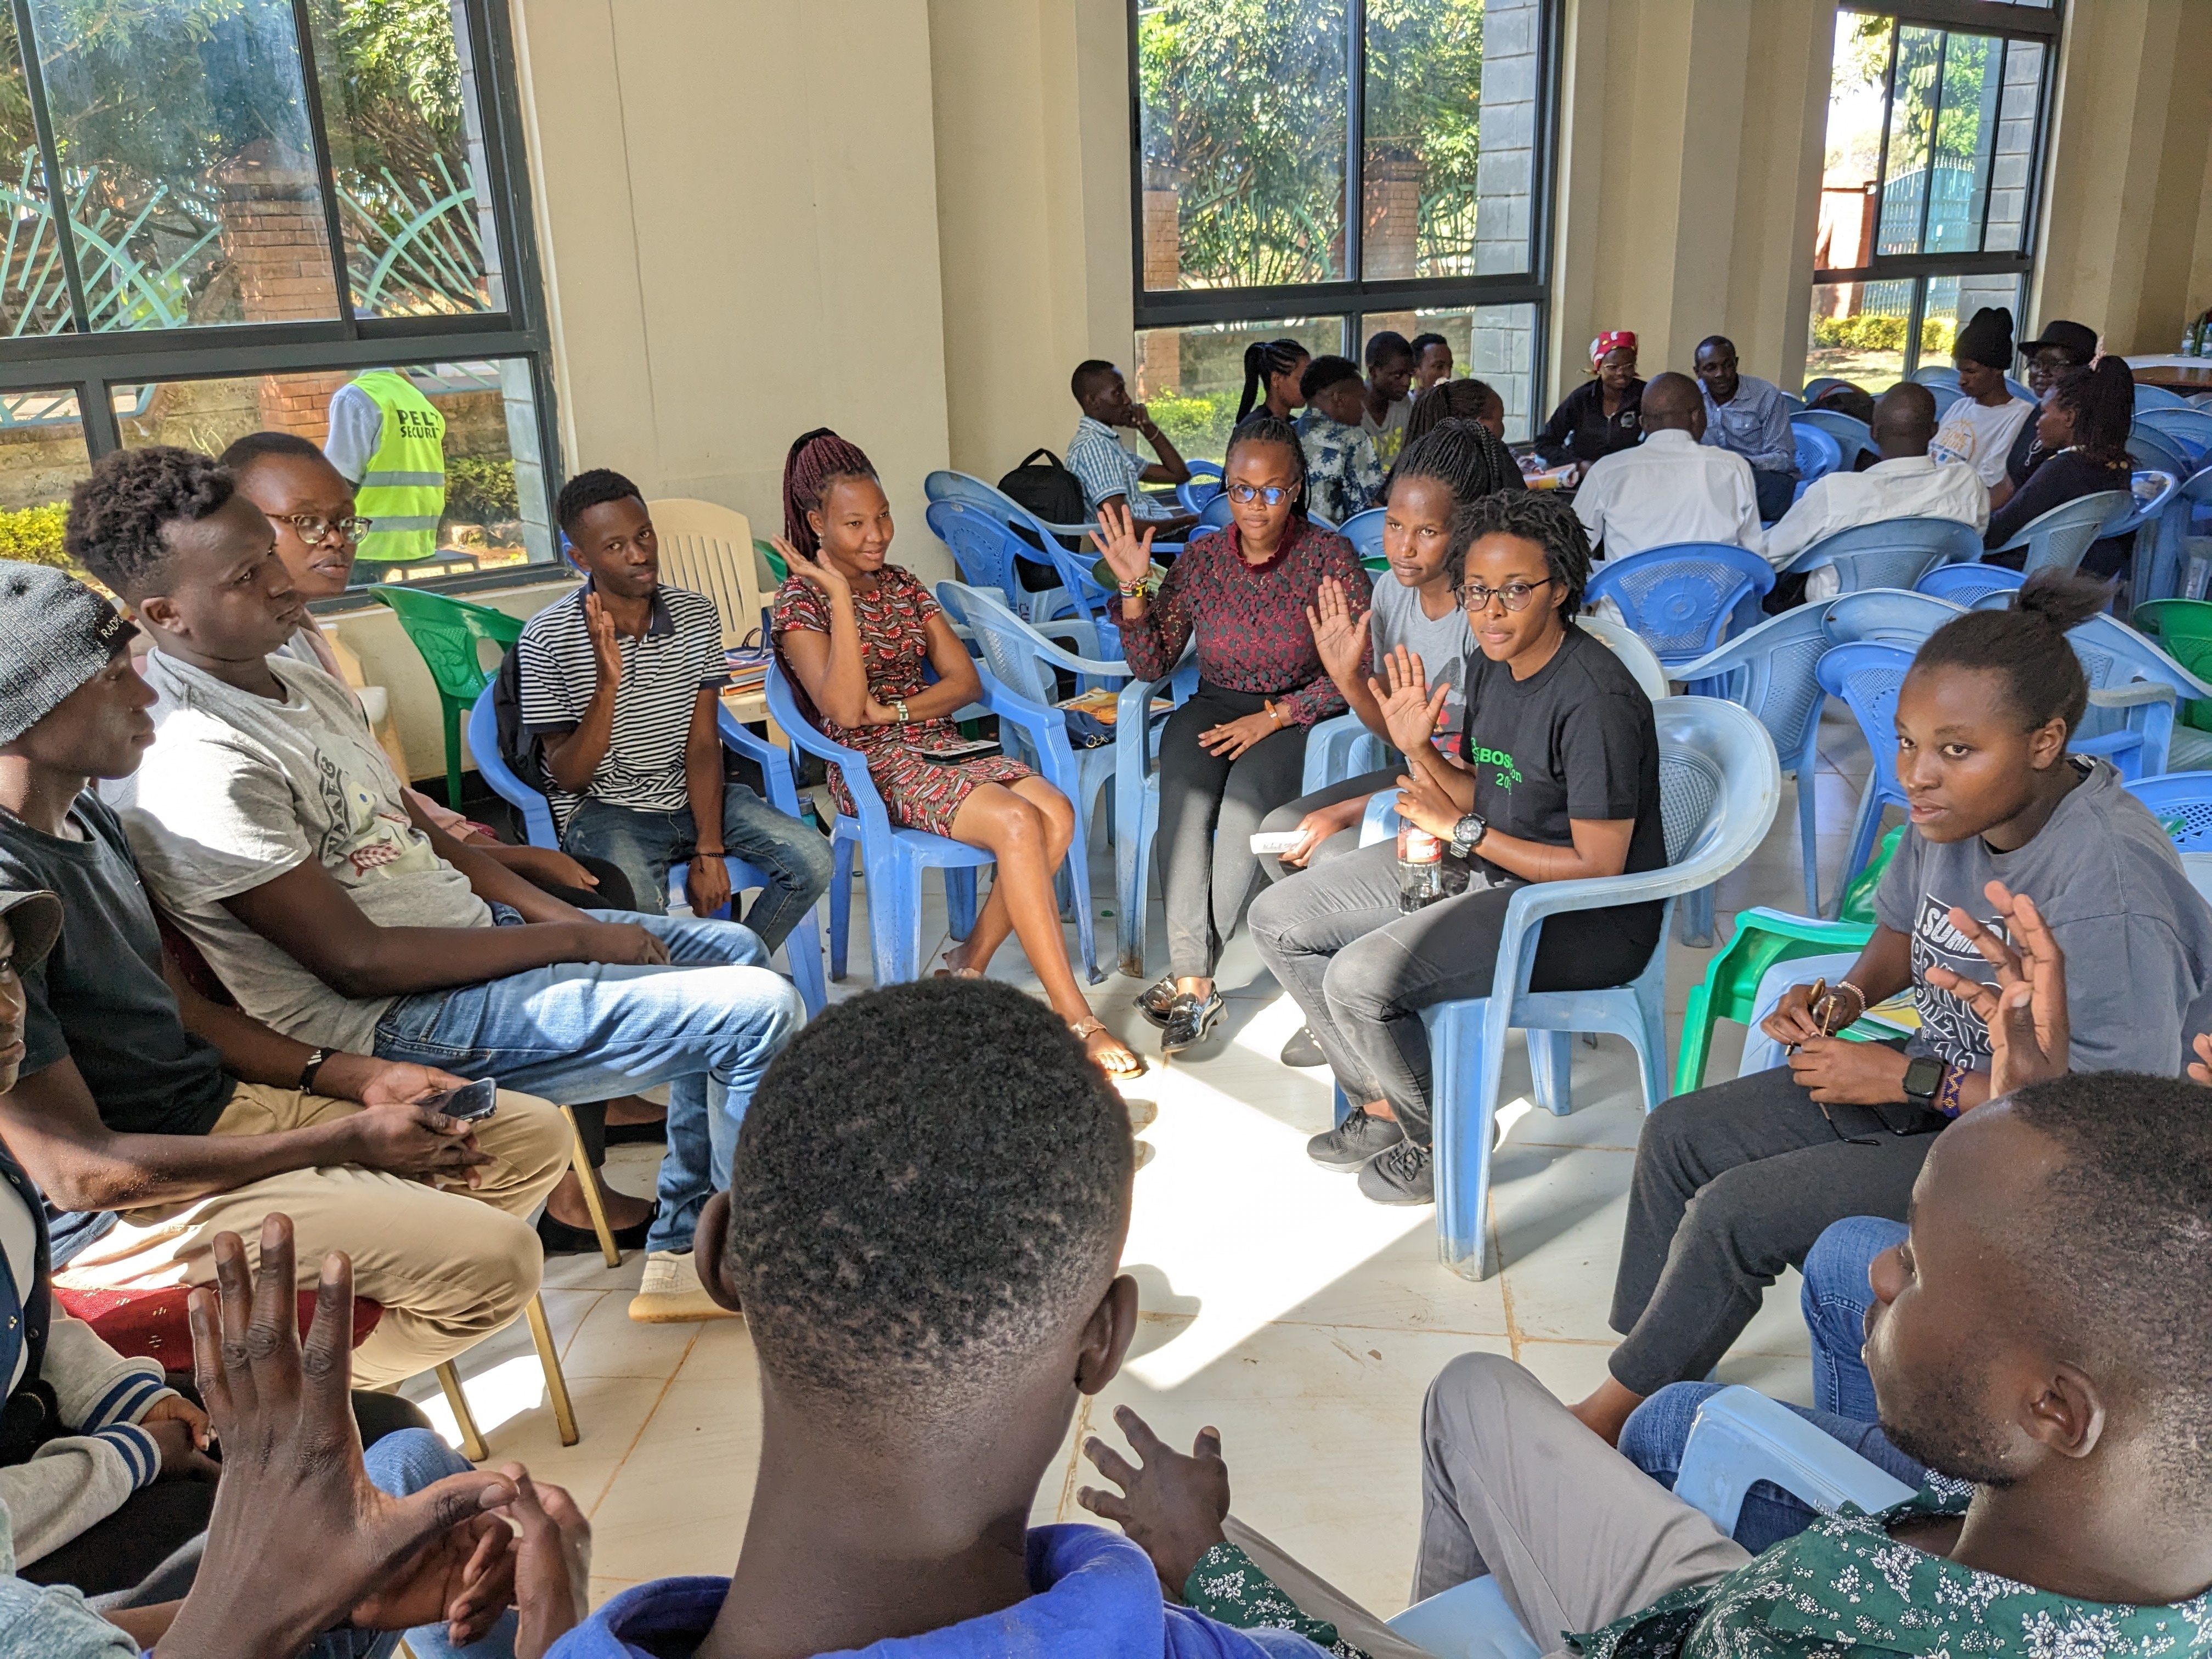 Bioinformatics Hub of Kenya members, young students, approximately 6 women and five men, sitting in blue chairs forming a circle, inside a modern concrete building with high ceilings, many of them raising their hands as in voting, engaging in a conversation, the sunlight creates a square shape in the middle of the circle (BHKi)